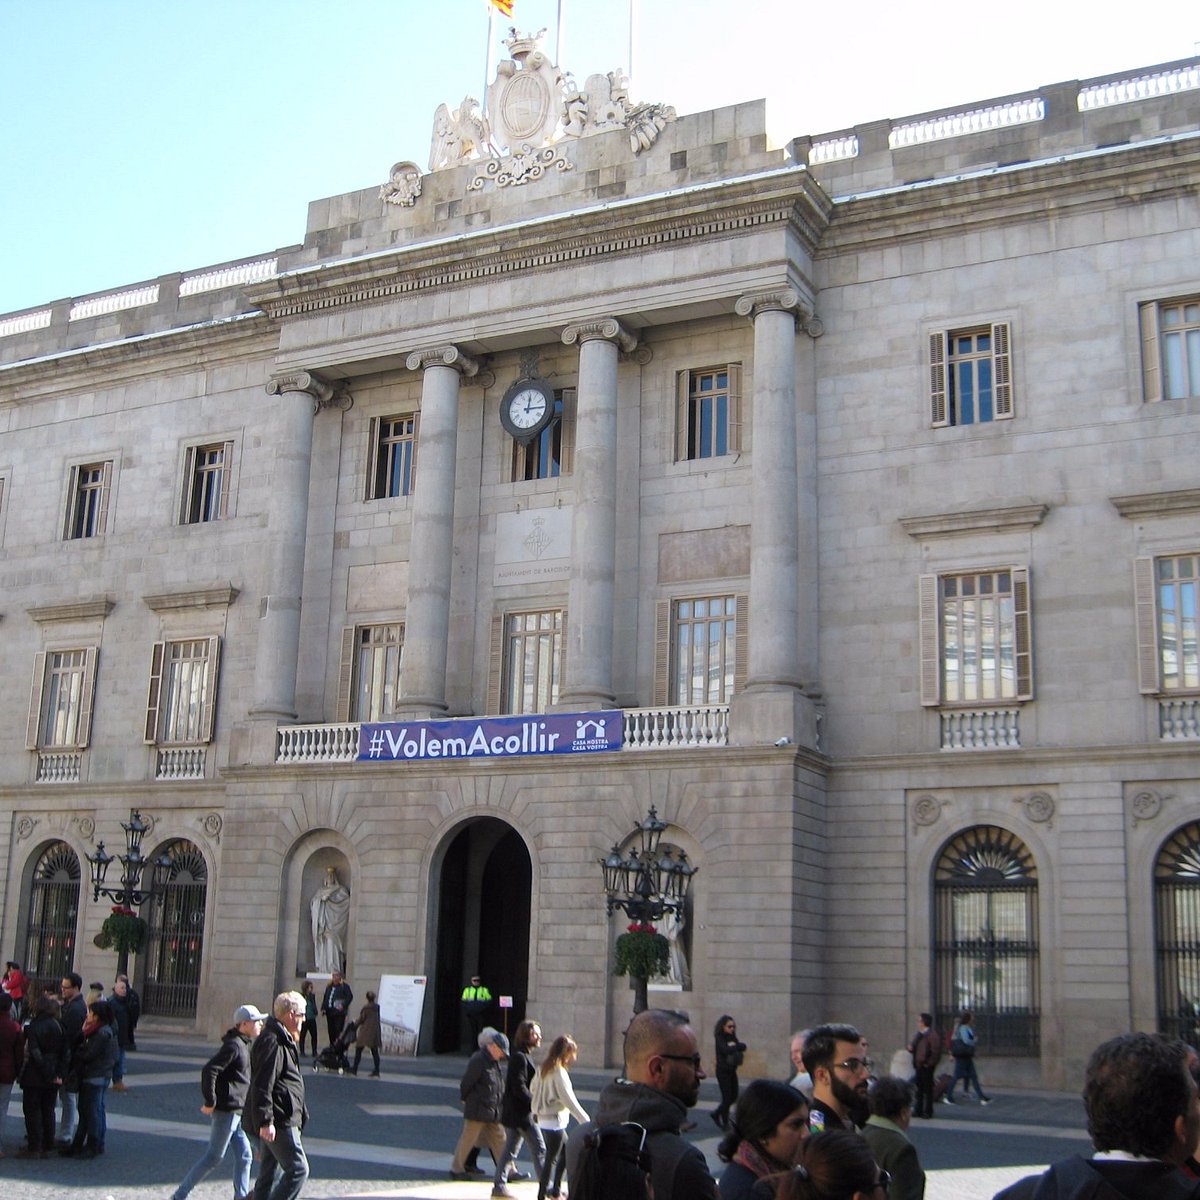 office of tourism barcelona